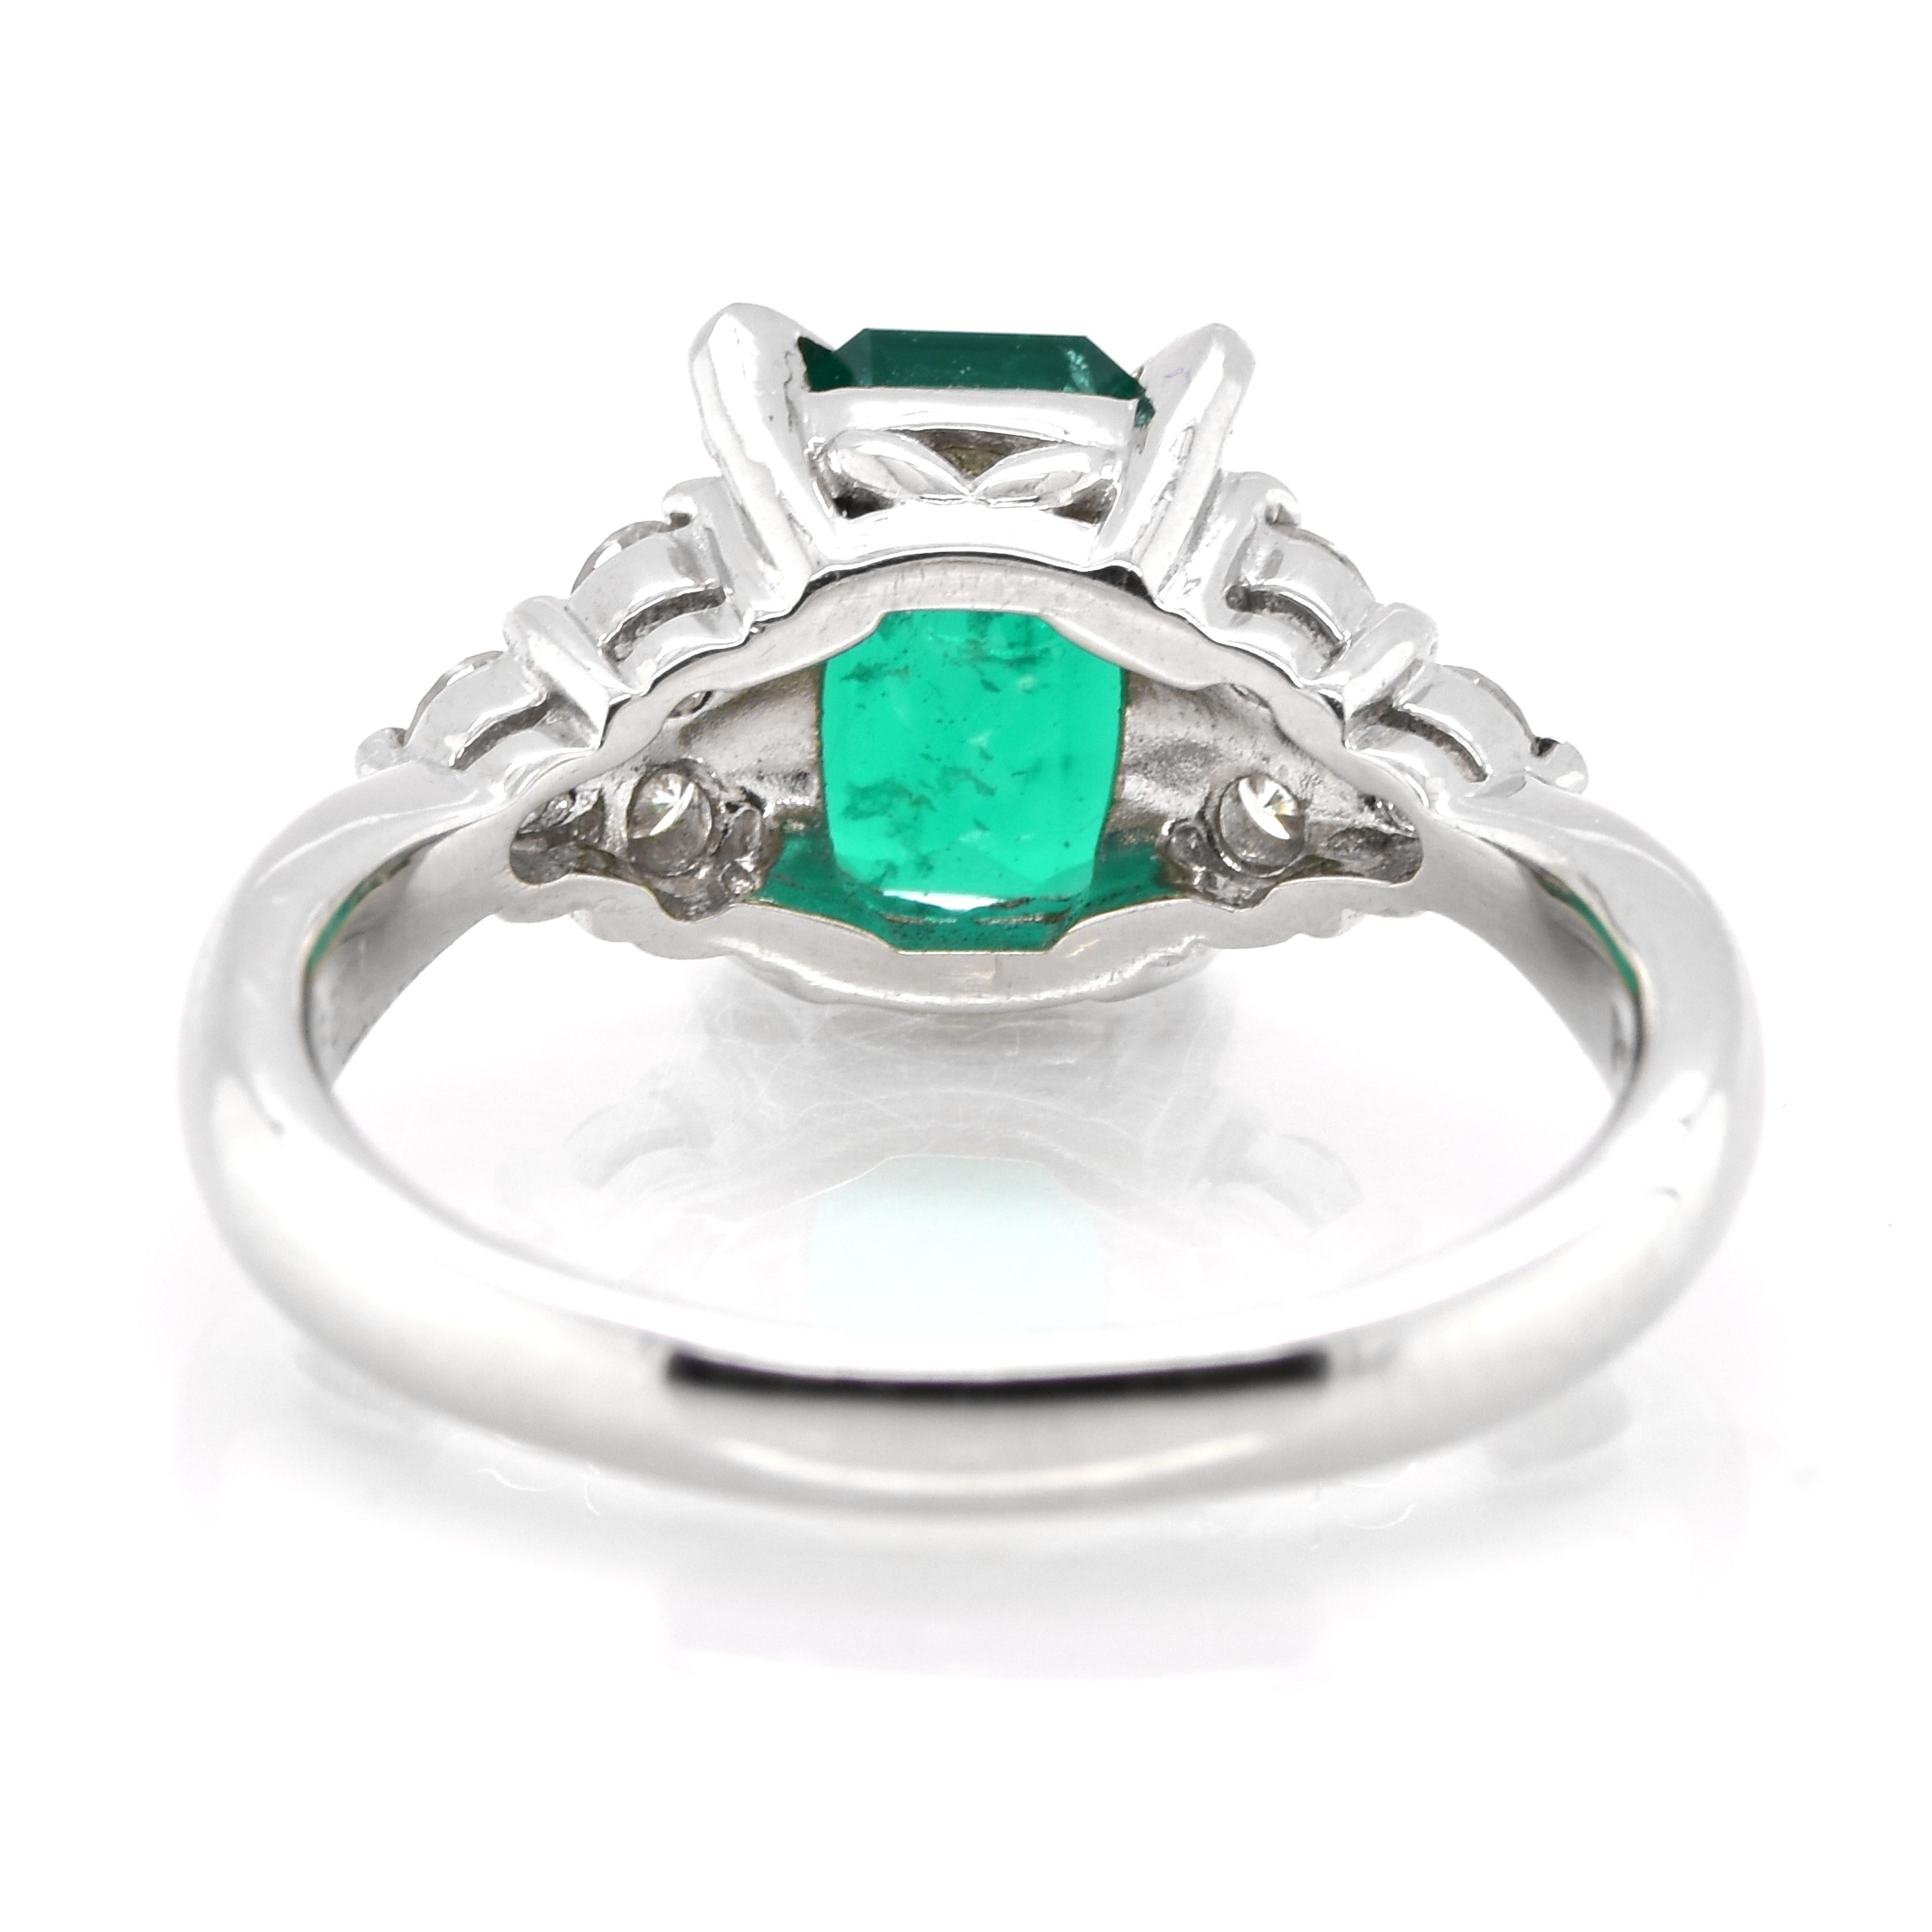 Women's 1.29 Carat Natural Emerald and Diamond Ring Made in Platinum